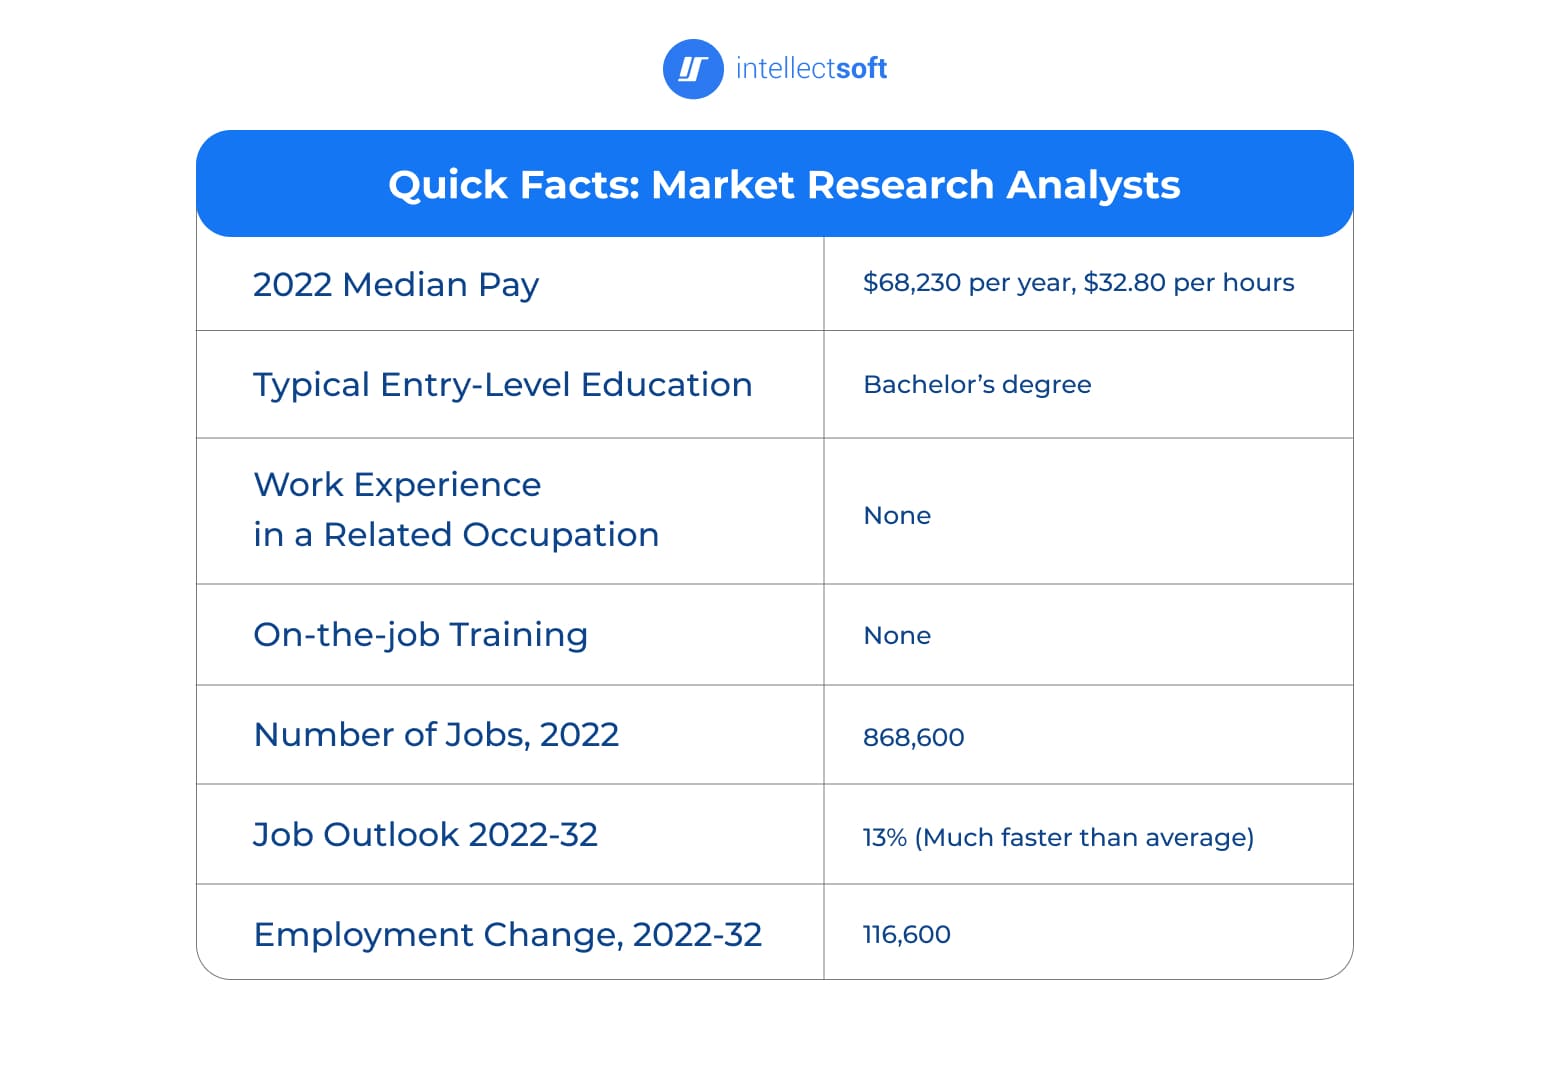 Table with info about market research analysts in the U.S.